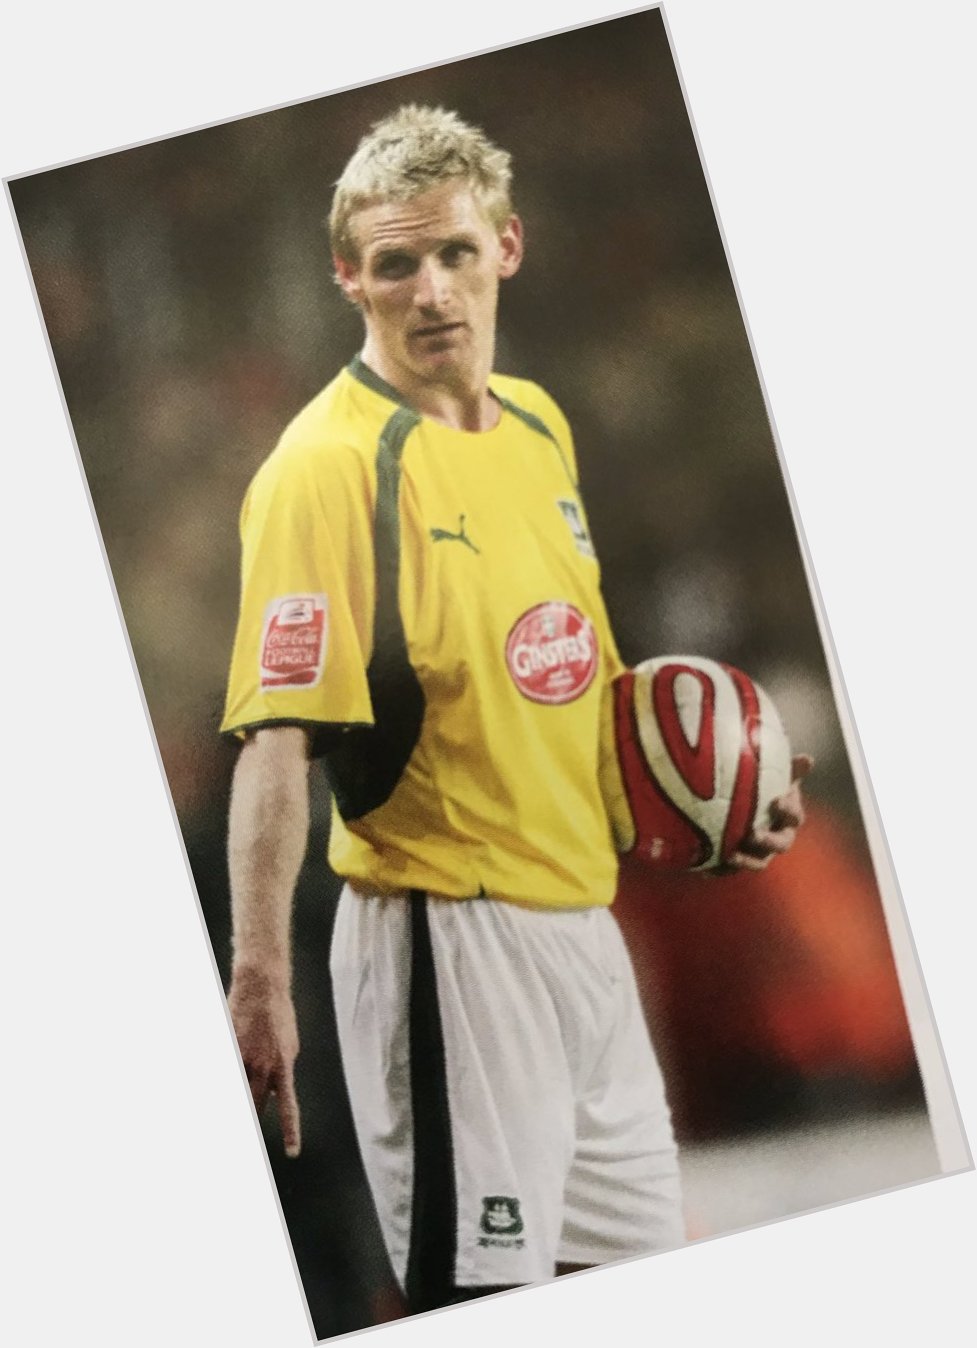 Happy Birthday to former player Gary Teale. If anyone has any contact details for Gary, please let me know. 